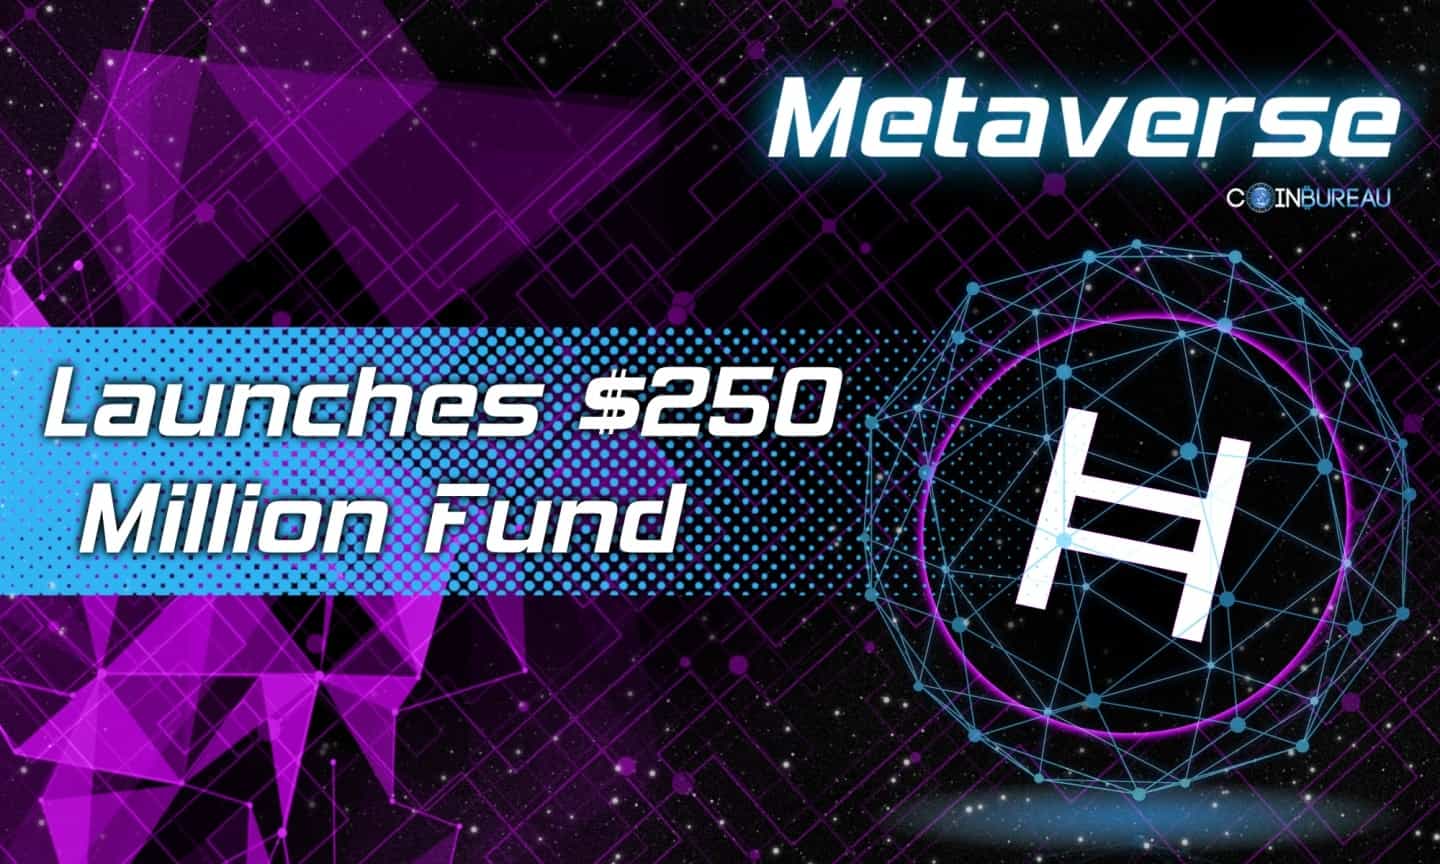 Hedera Hashgraph Launches $250 Million Metaverse Fund